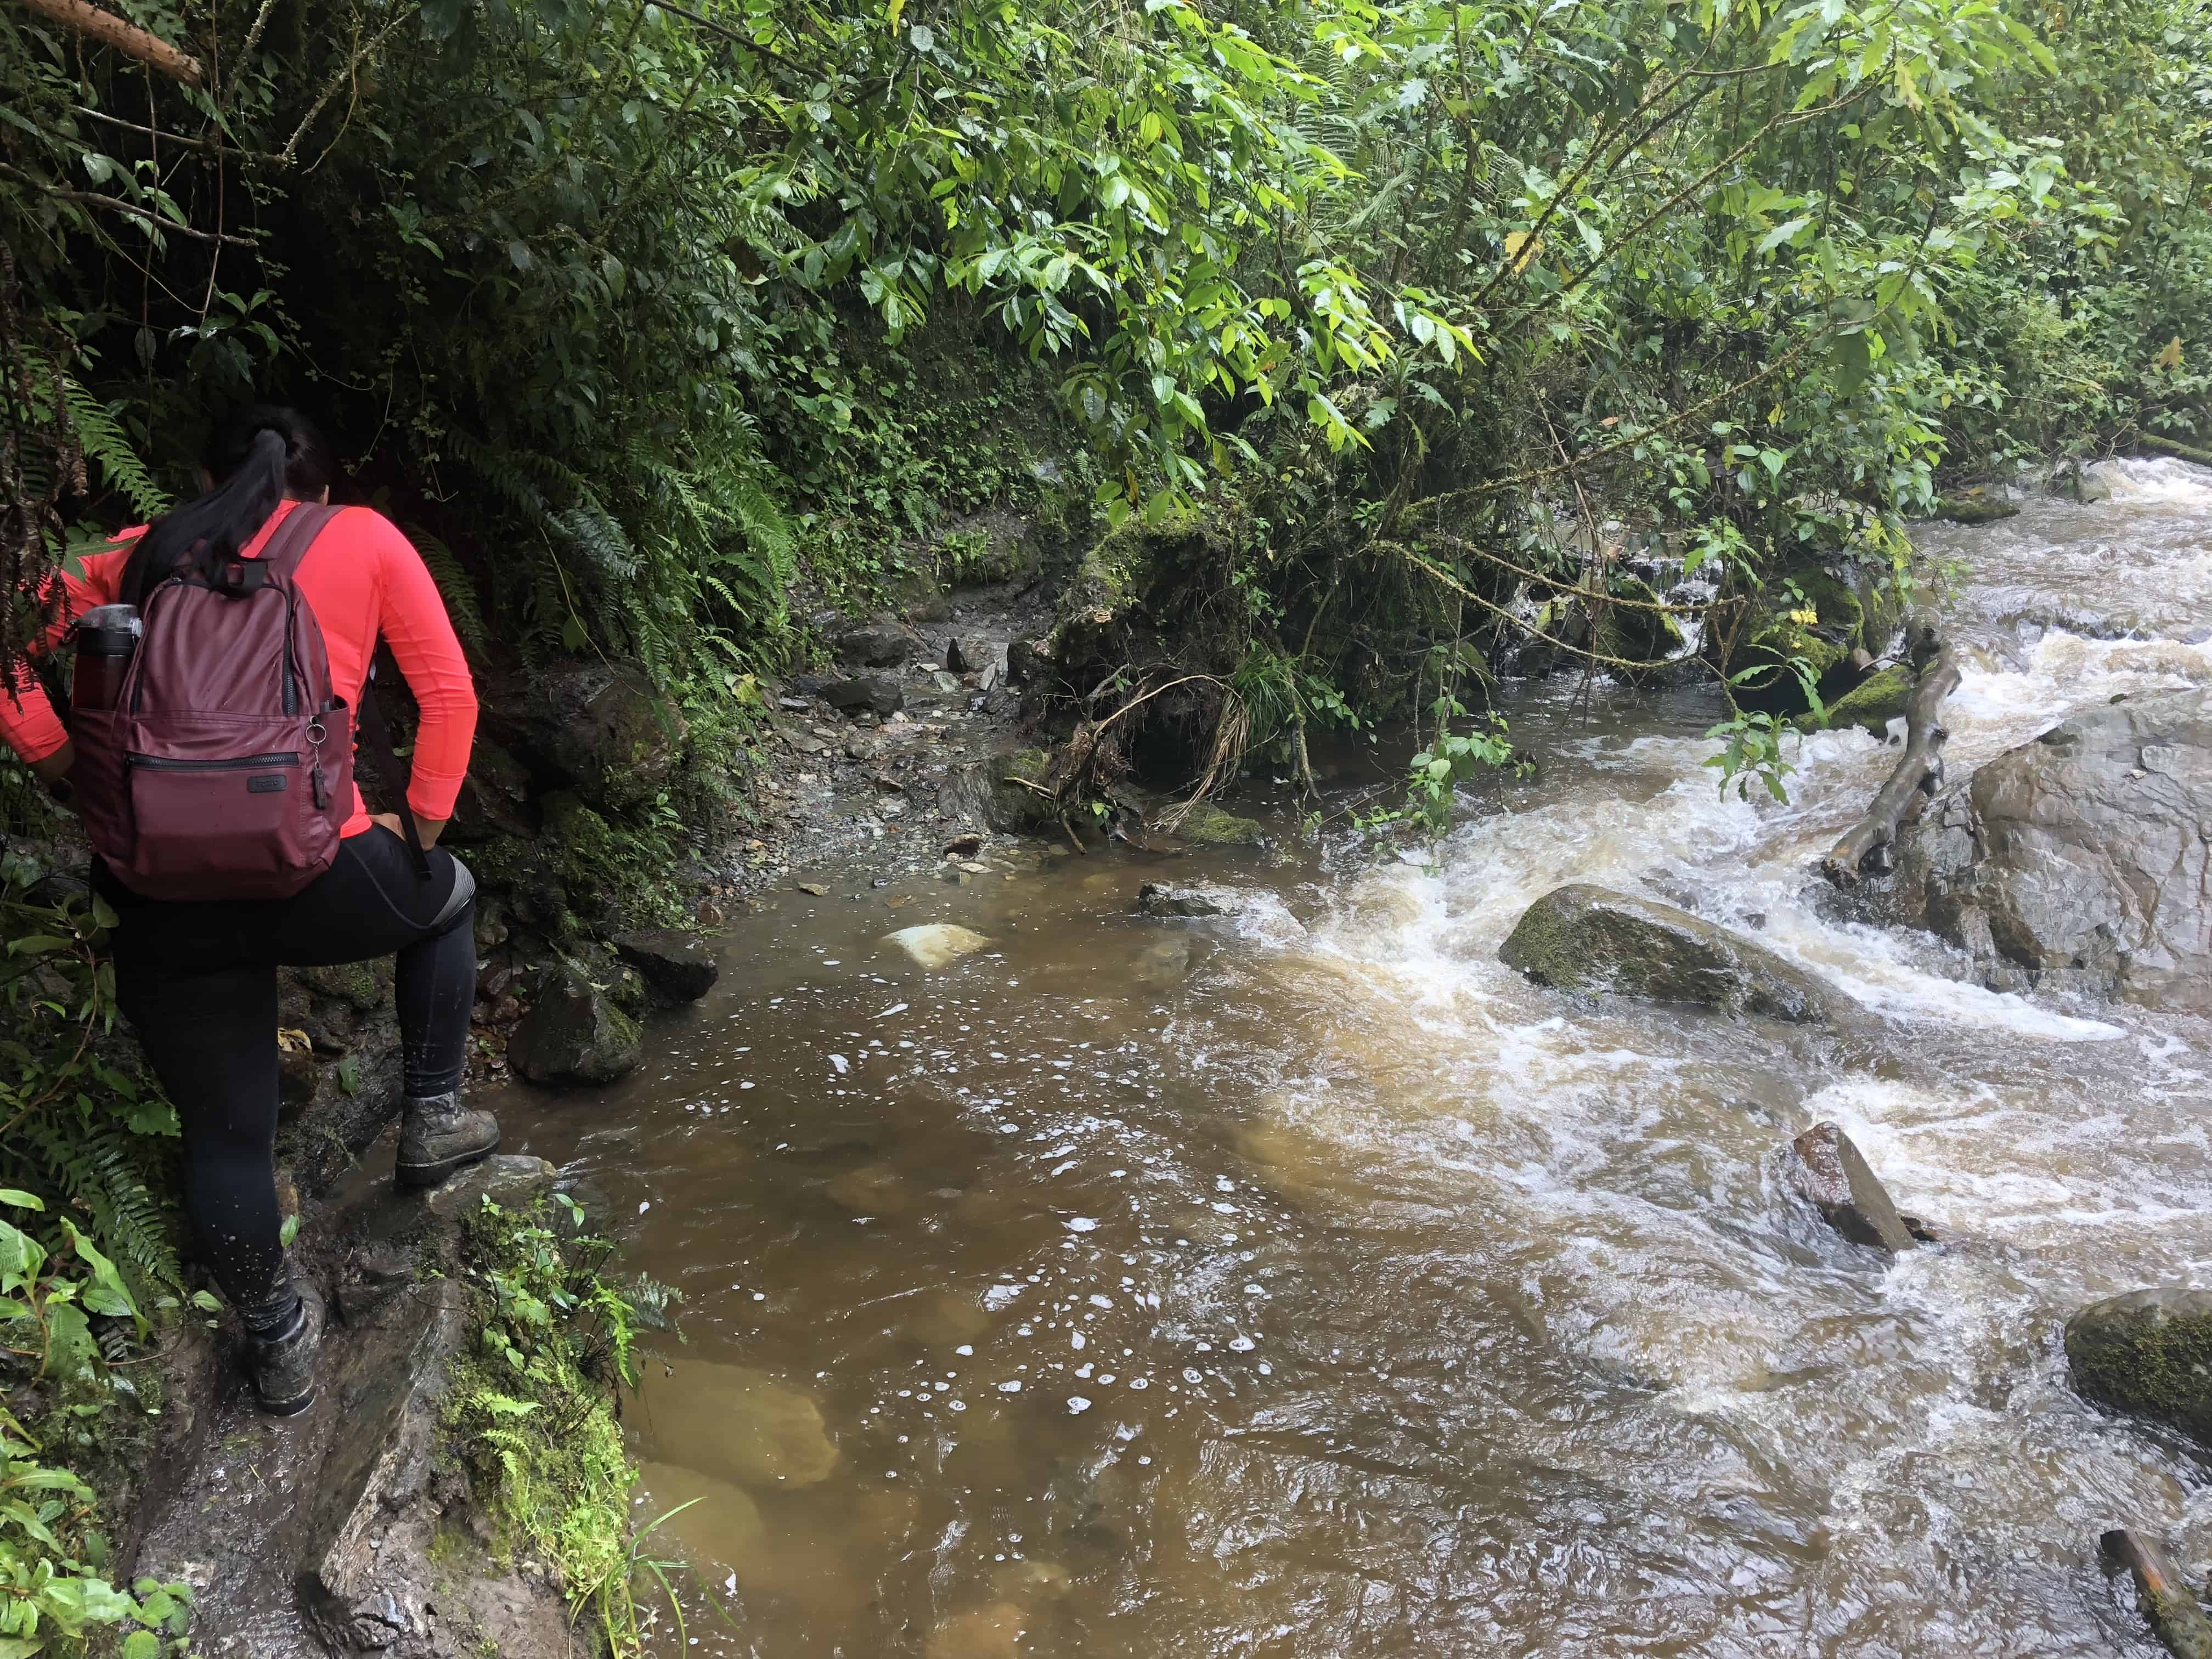 A flooded section of the trail at Cocora Valley in Quindío, Colombia